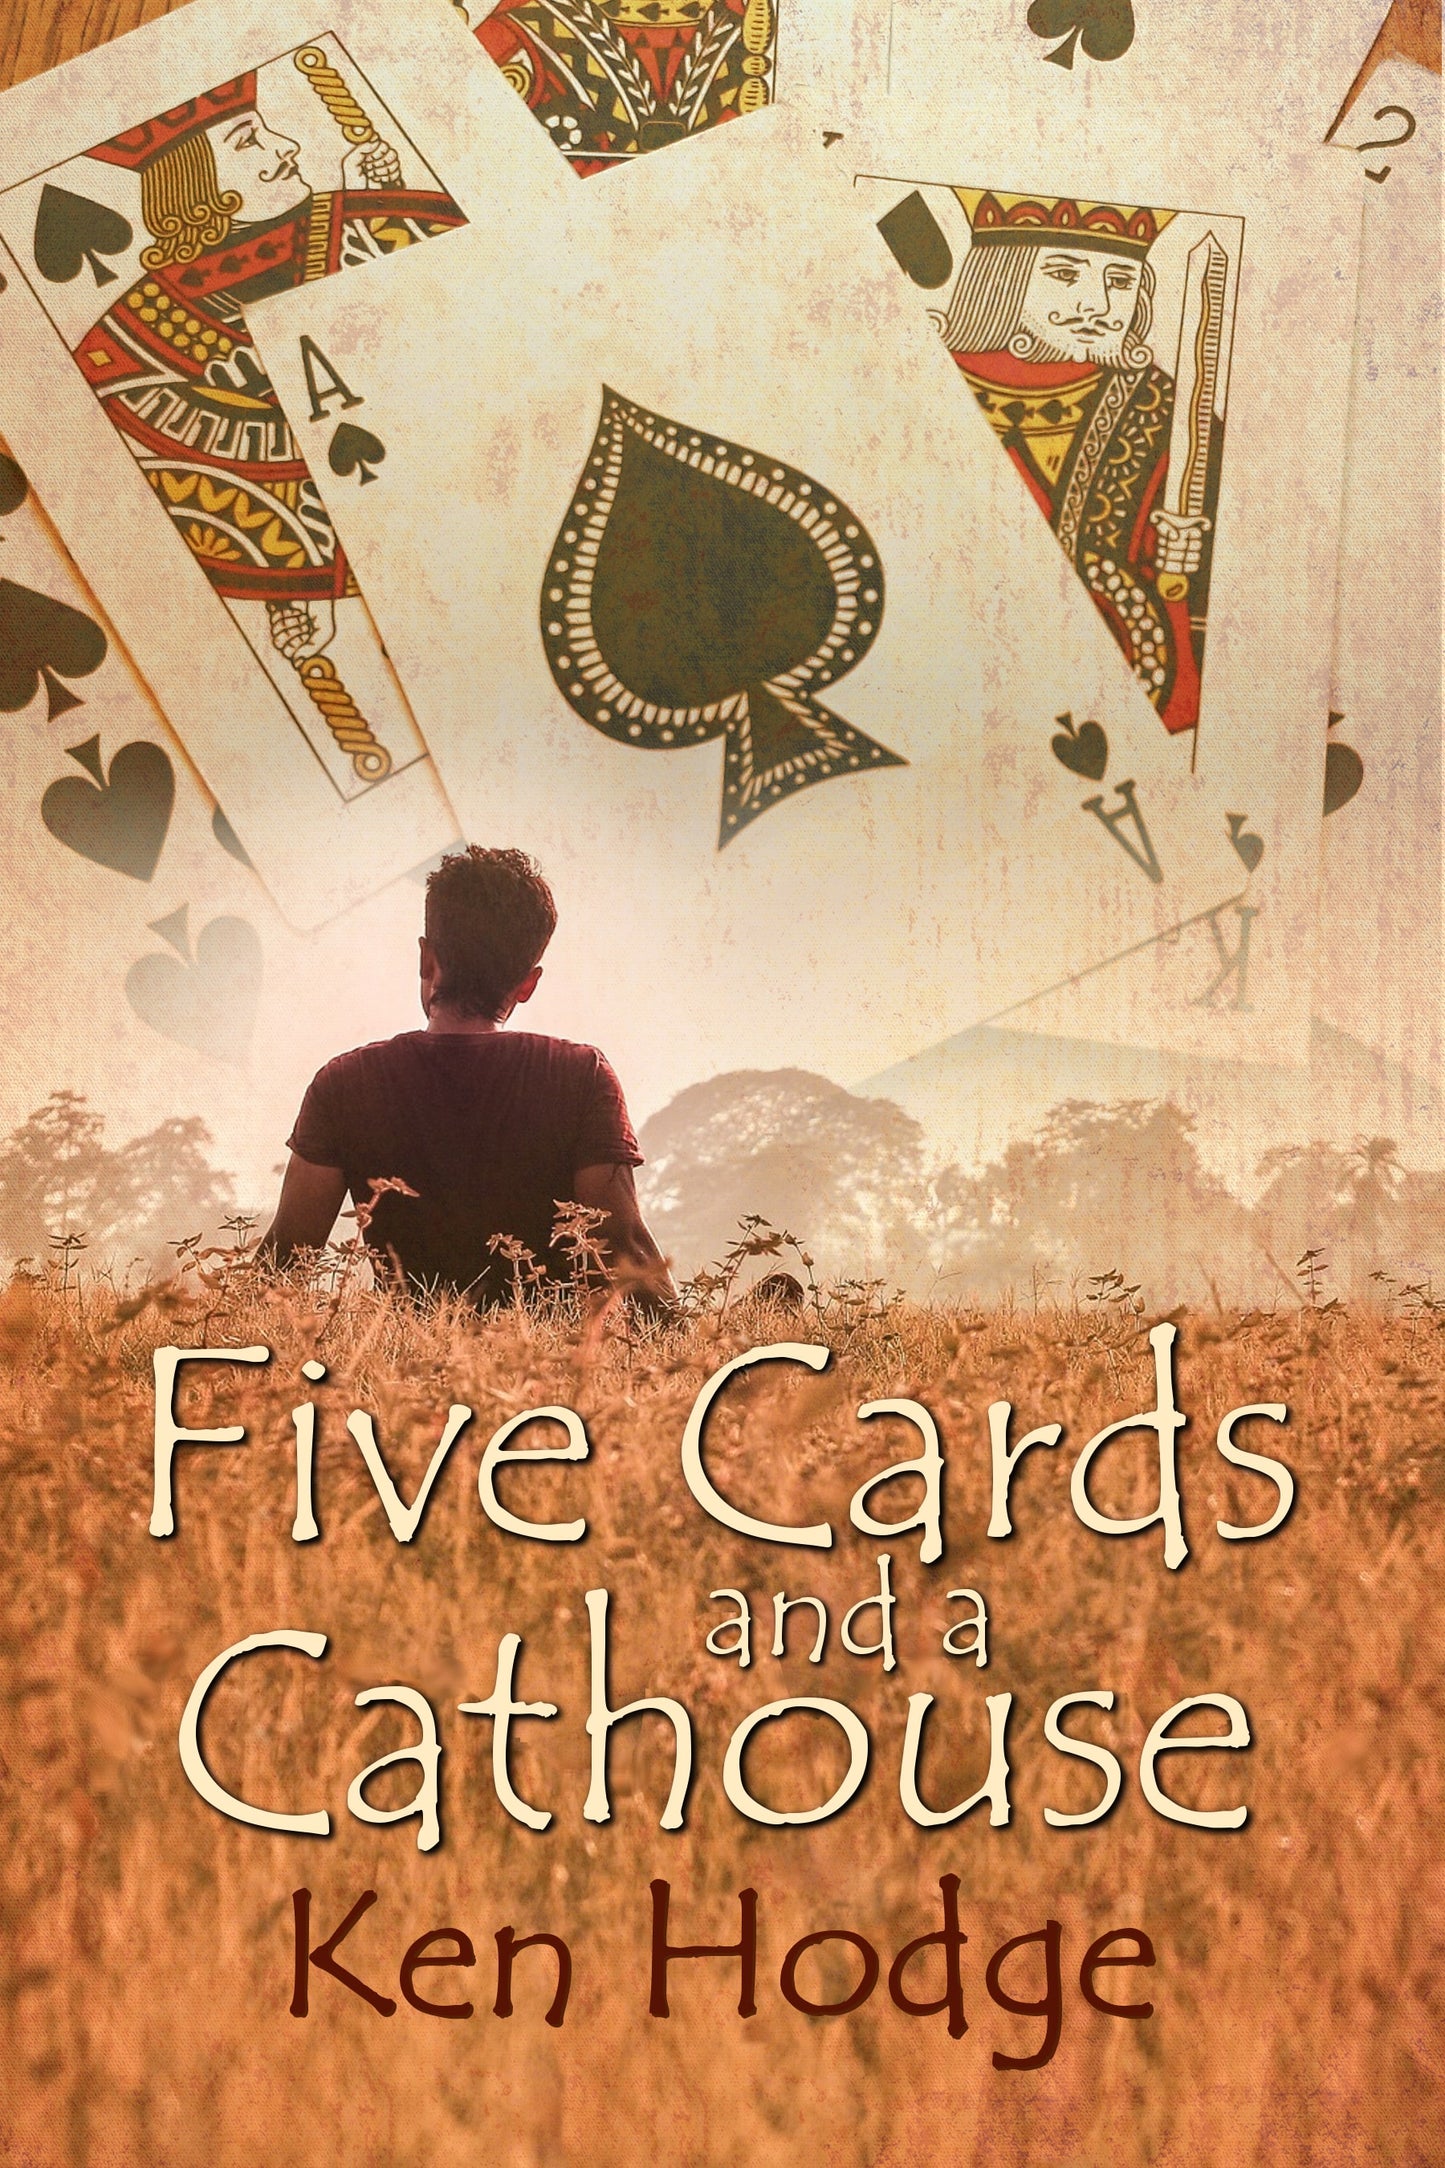 Five Cards and a Cathouse